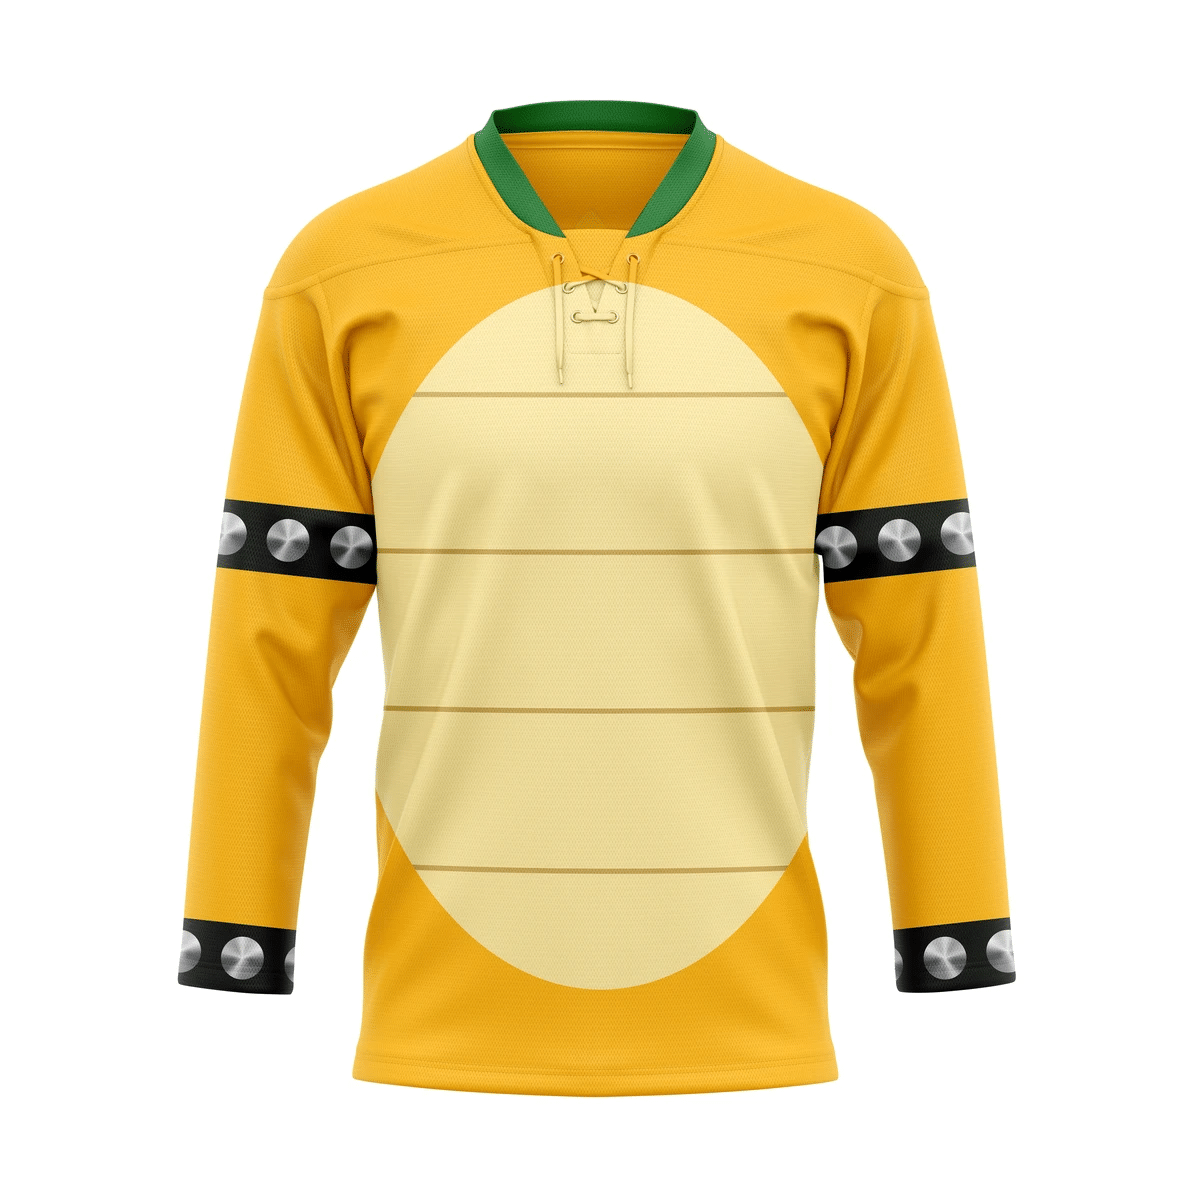 Top hot hockey jersey for NHL fans You can find out more at the bottom of the page! 107